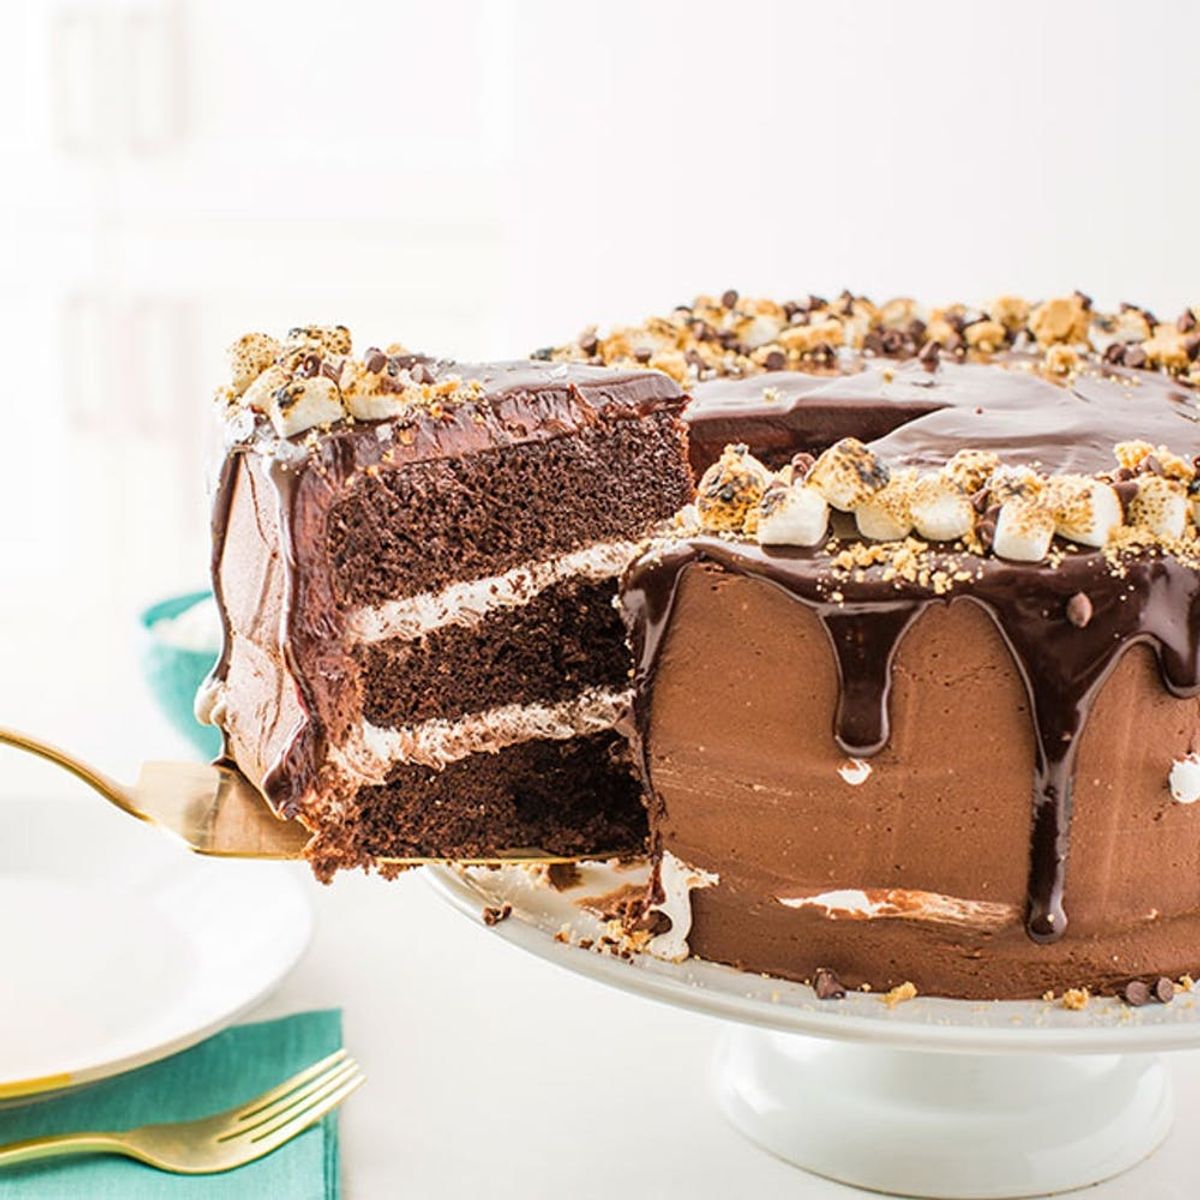 How to Make a Salted Nutella S’mores Cake Guests Will Go Crazy Over